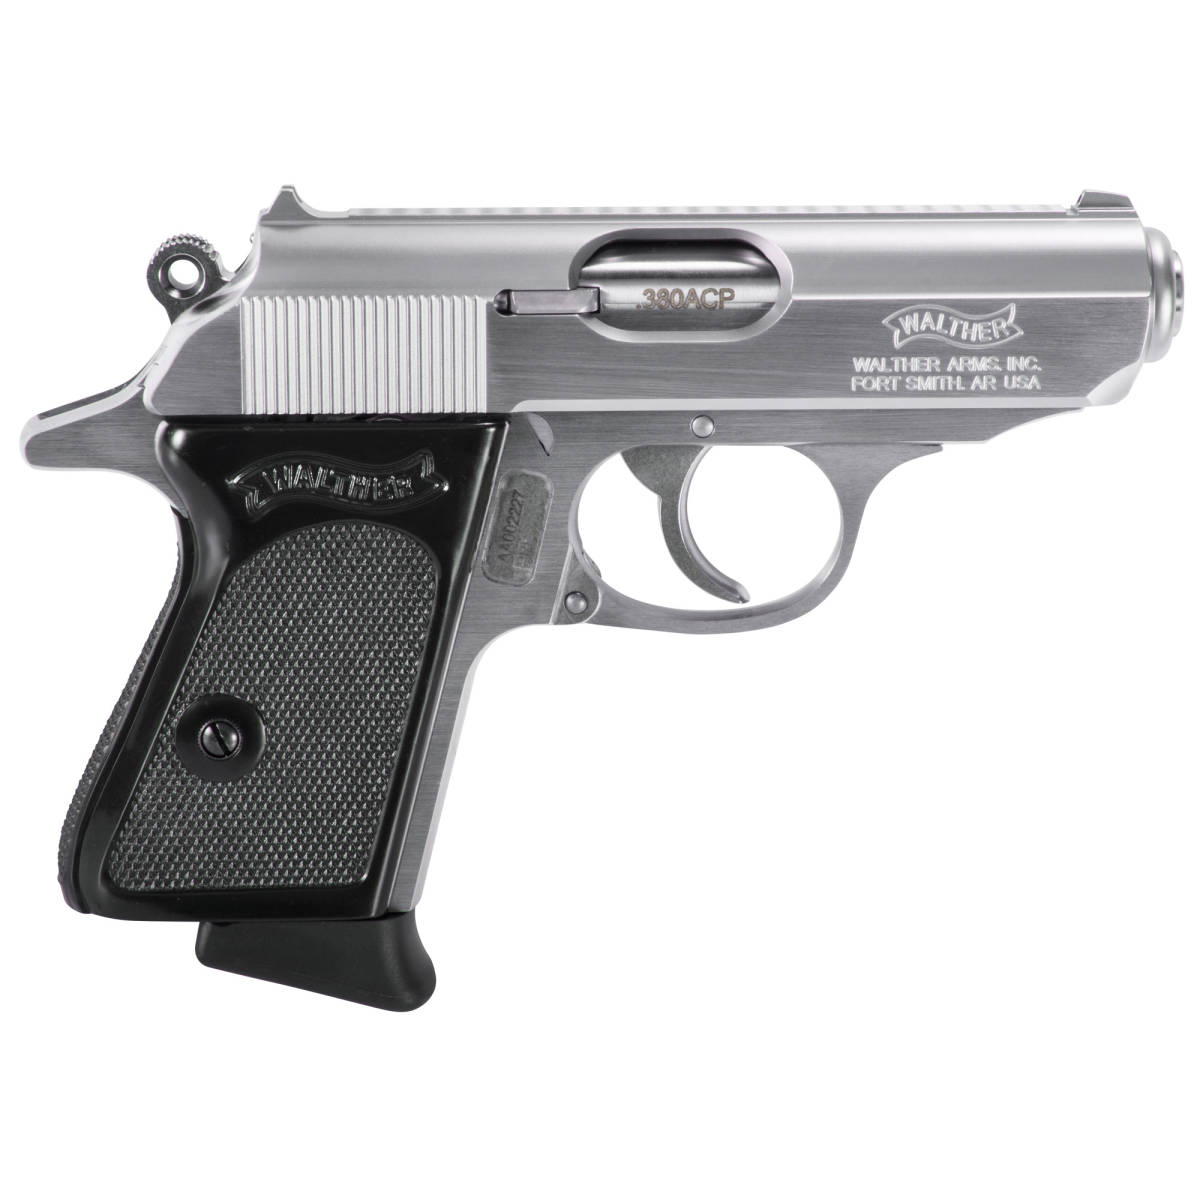 Walther PPK 380 ACP STAINLESS S.S 380acp Semi Auto 3.6” 6RD-img-1